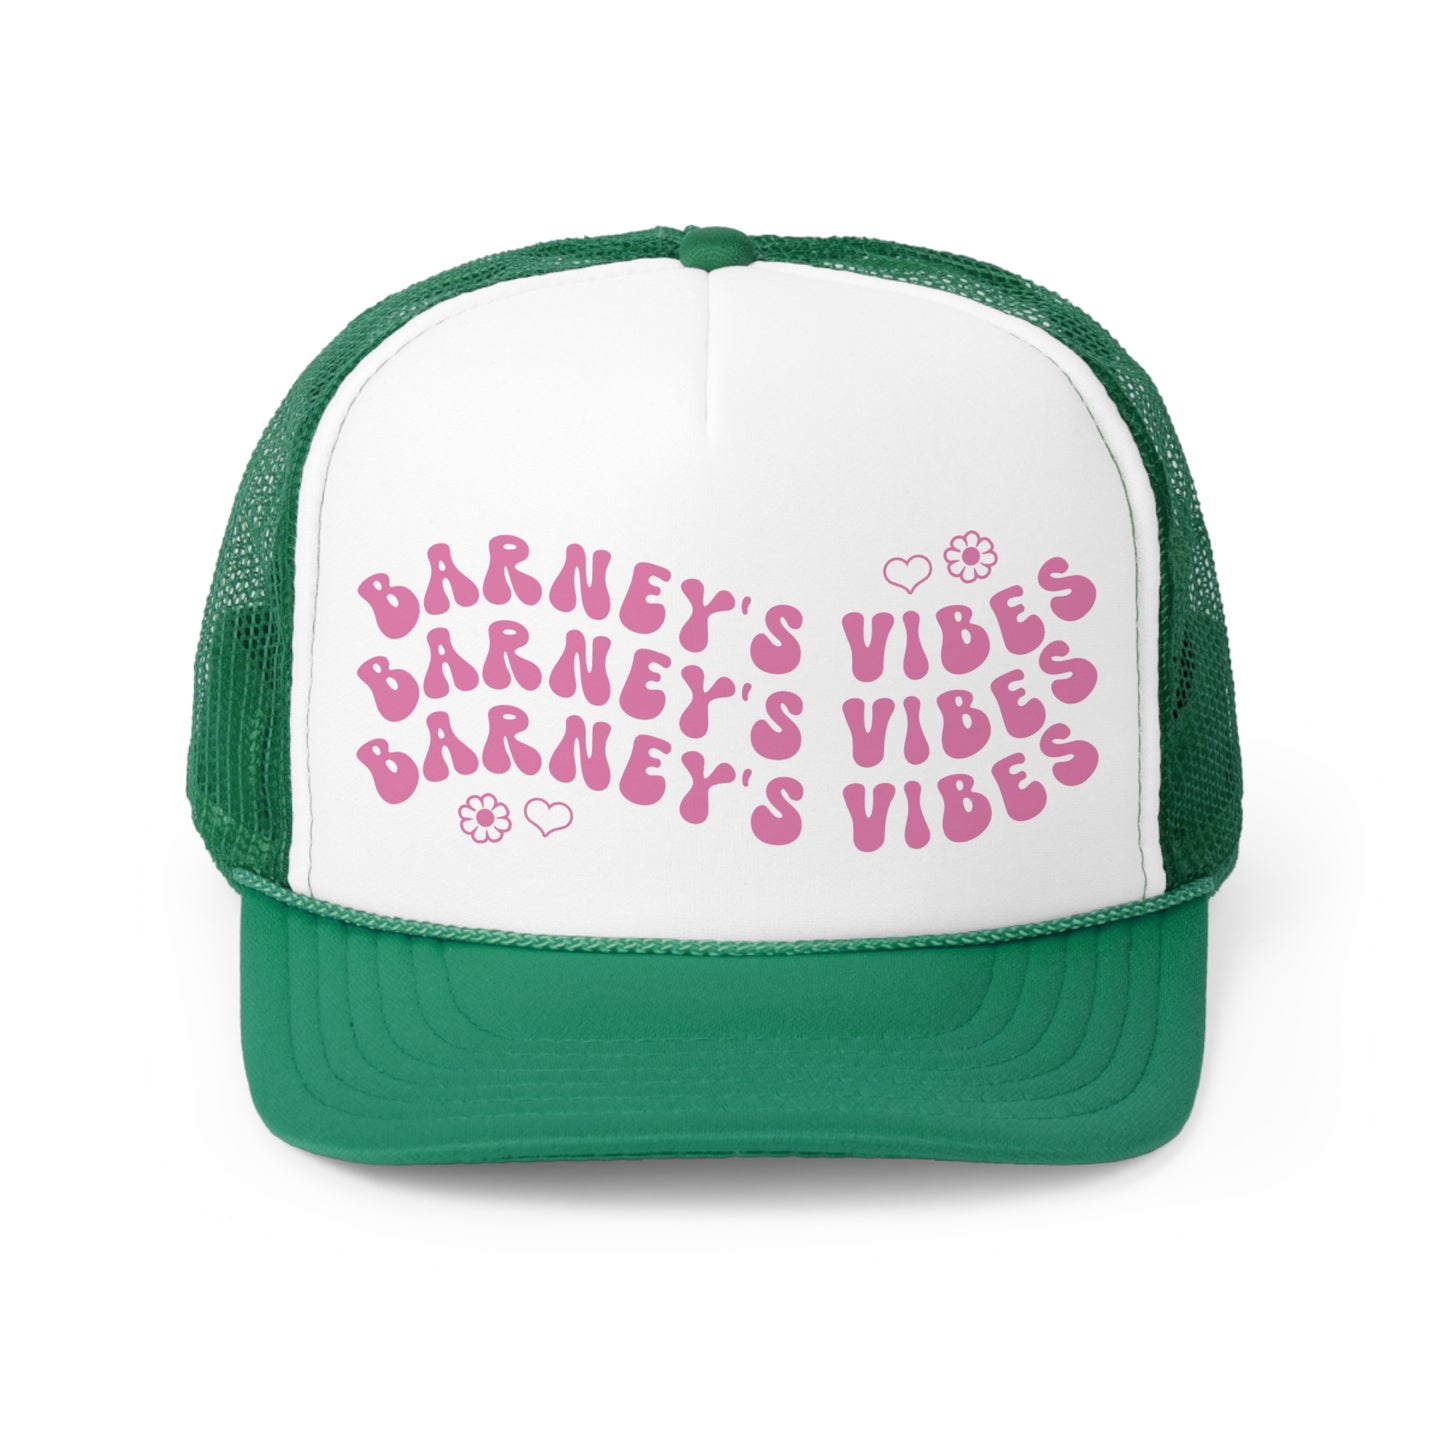 Barney's Vibes | BARNEY'S BEANERY - Trucker Hat | Berry Graphic On Green And White Trucker Hat, Front View